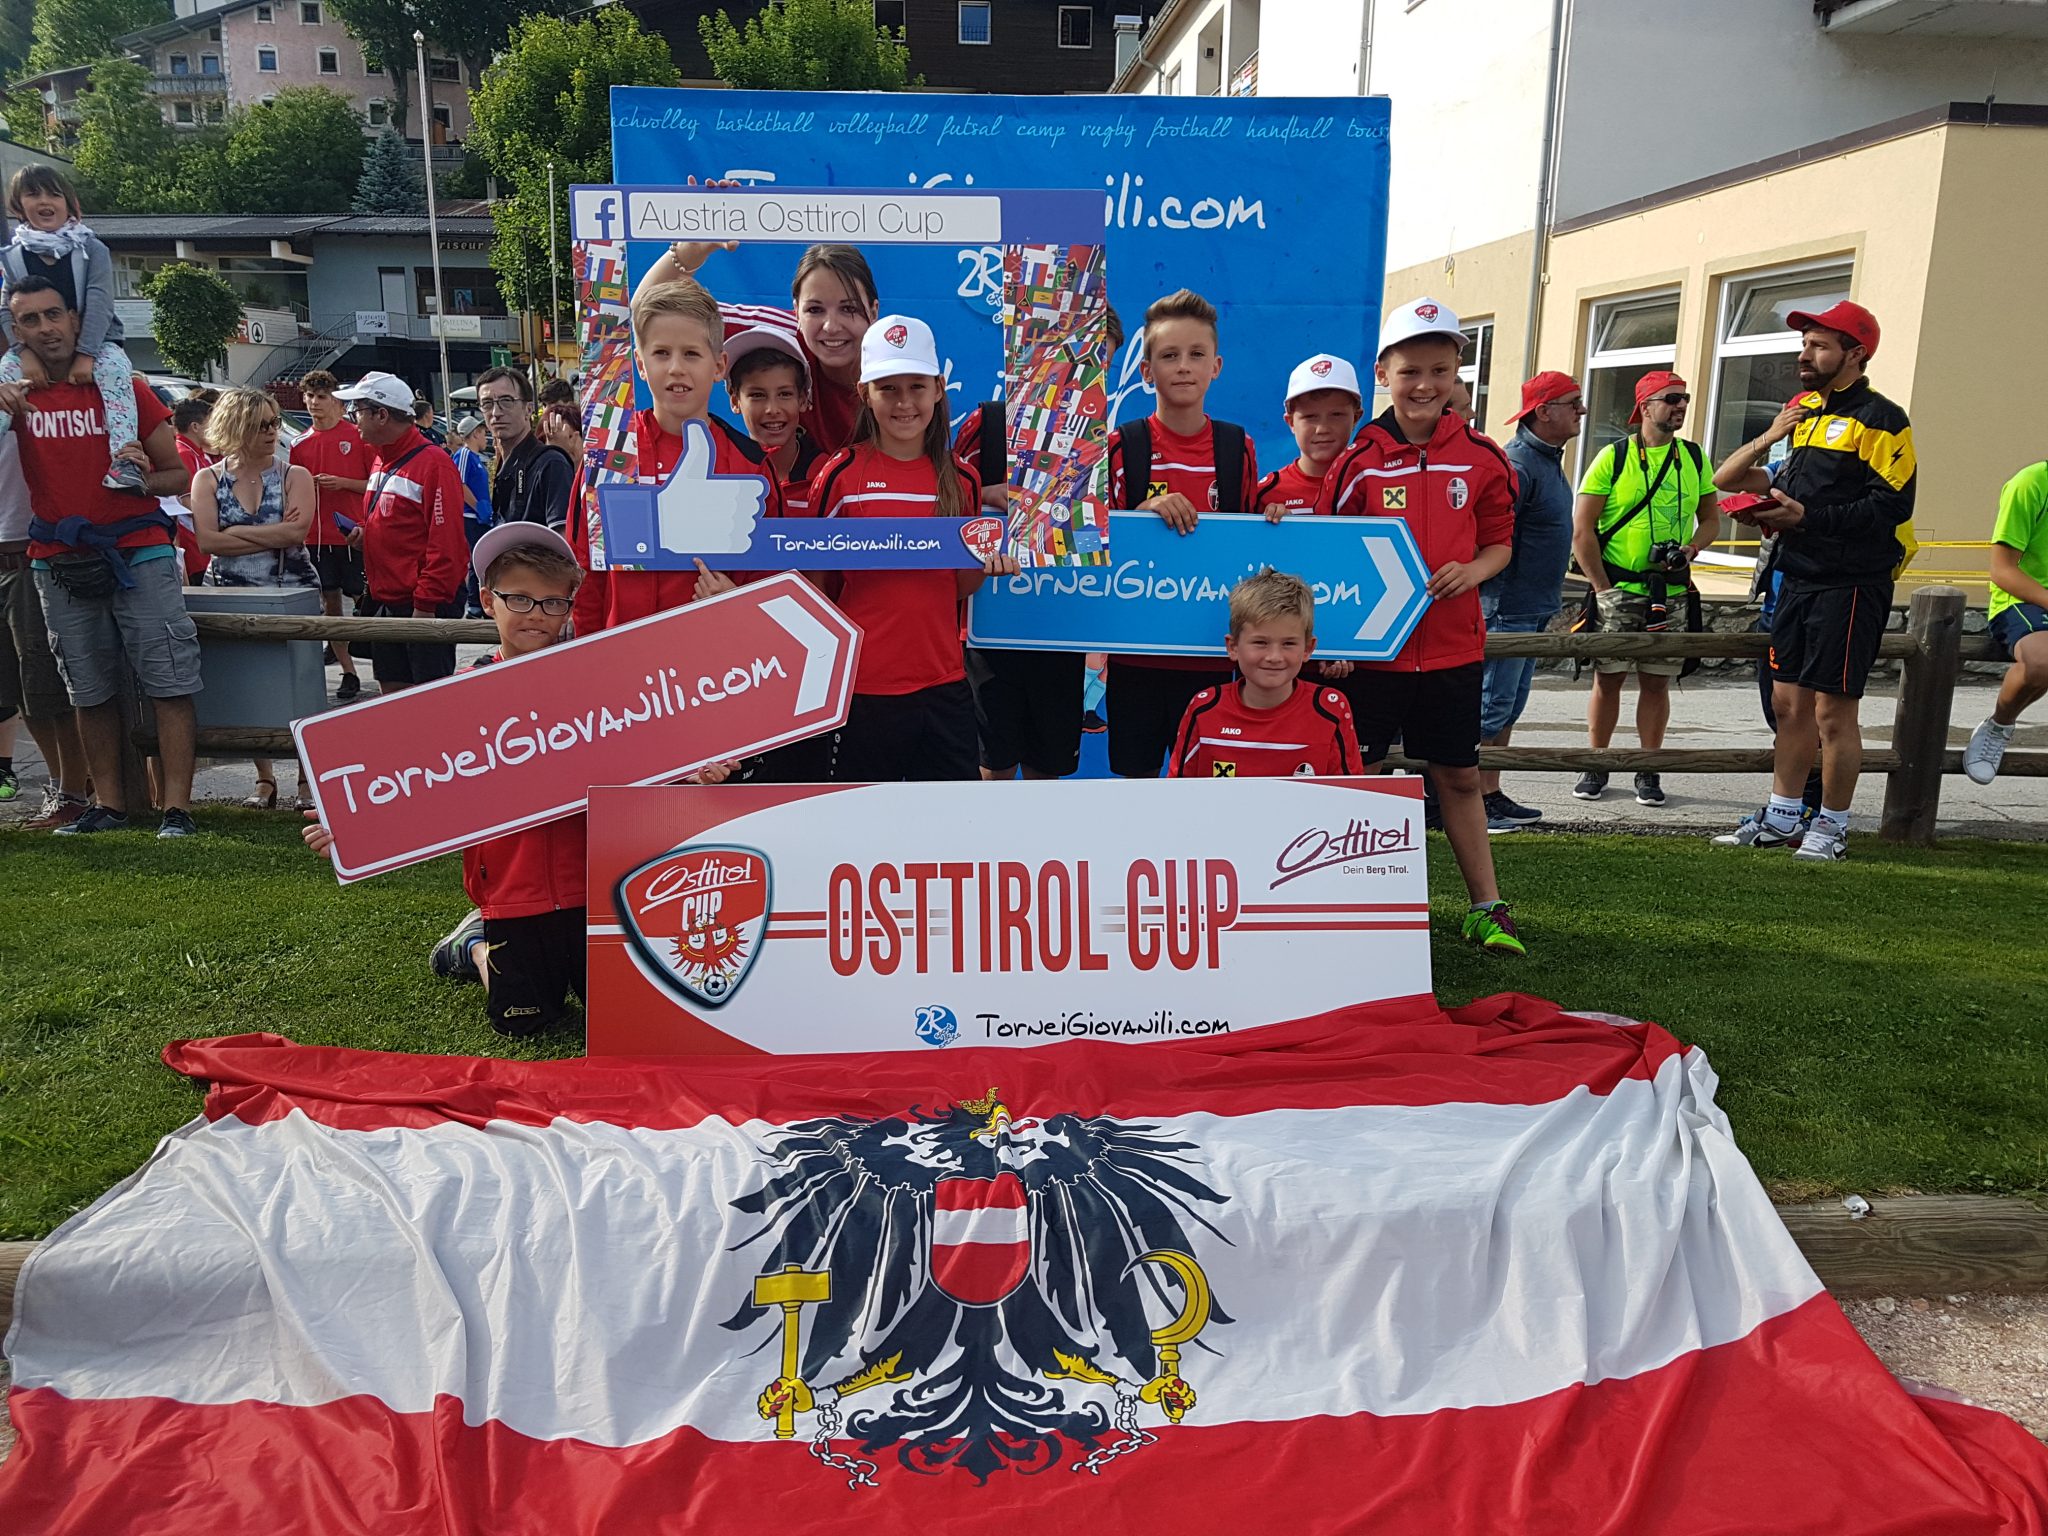 Osttirol Cup - participants with facebook frame - Road to Sport